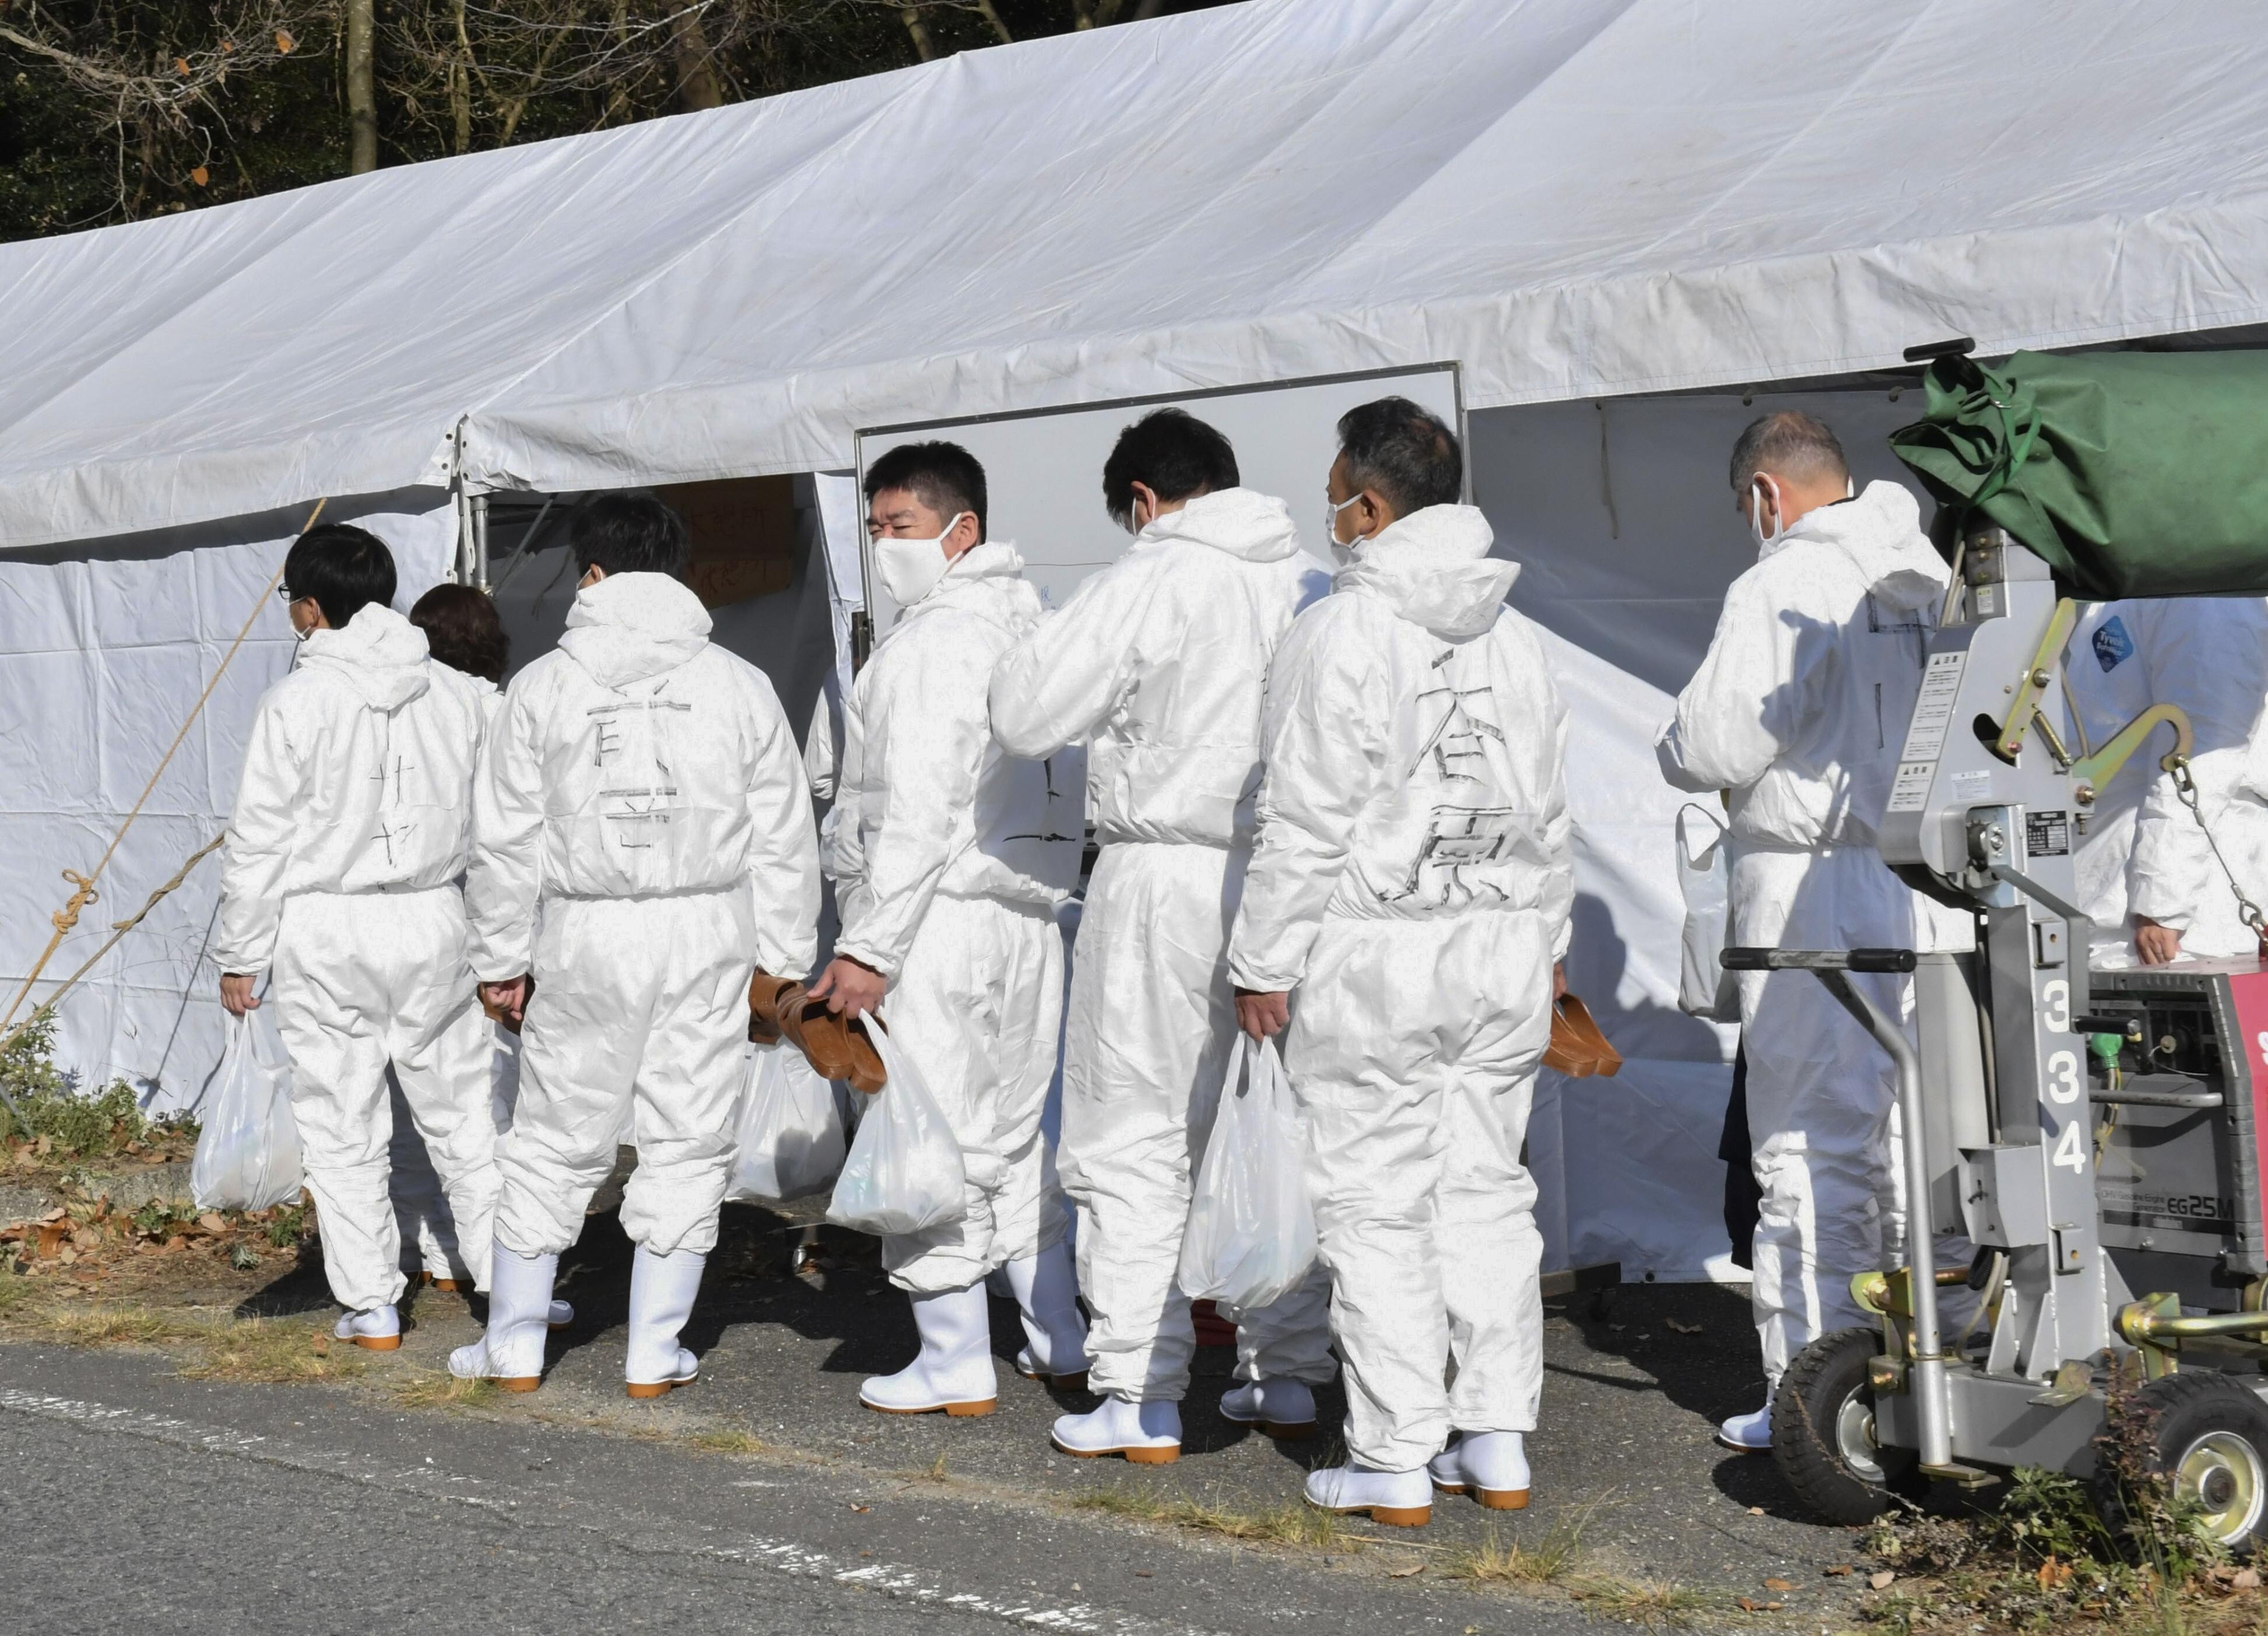 Officials in protective suits are pictured in Mihara in Hiroshima Prefecture ahead of the culling of thousands of chickens at a farm where an outbreak of bird flu was confirmed. Photo: Kyodo